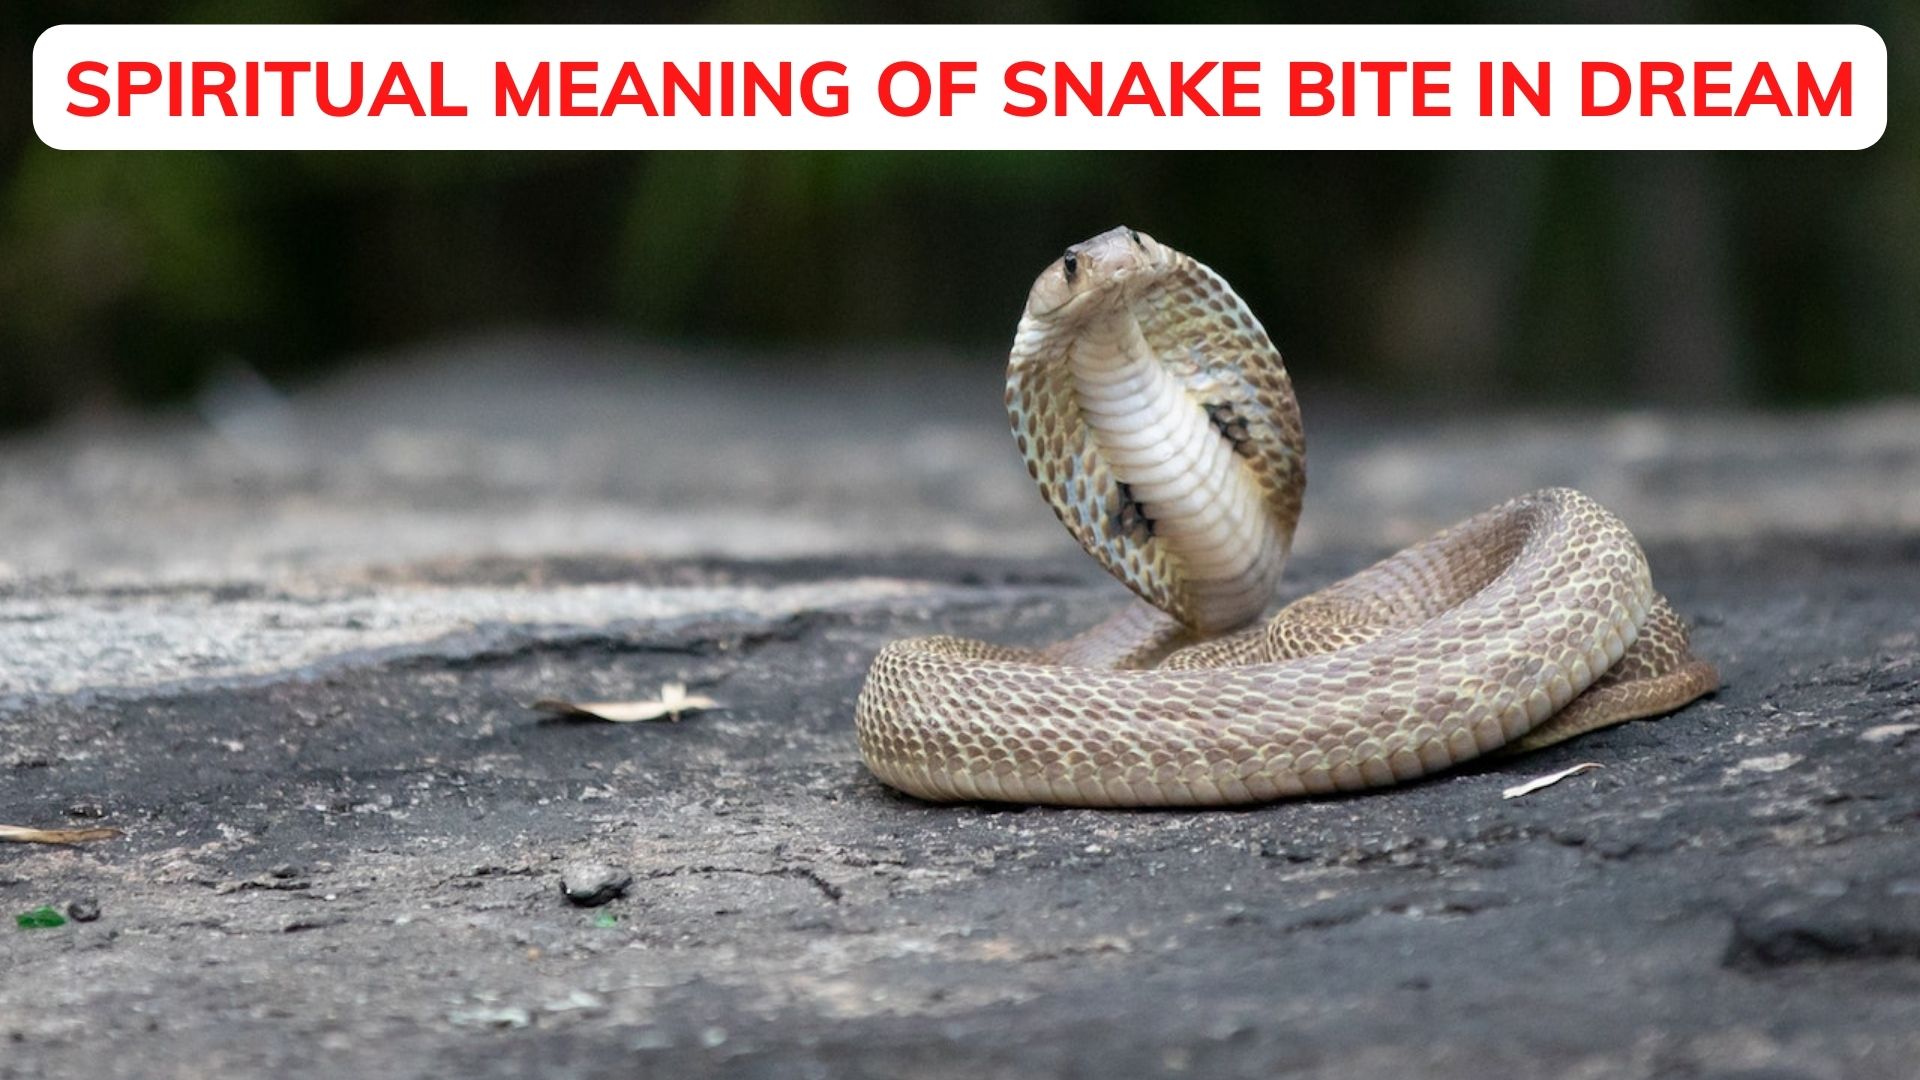 Spiritual Meaning Of Snake Bite In Dream - Hasty Judgments